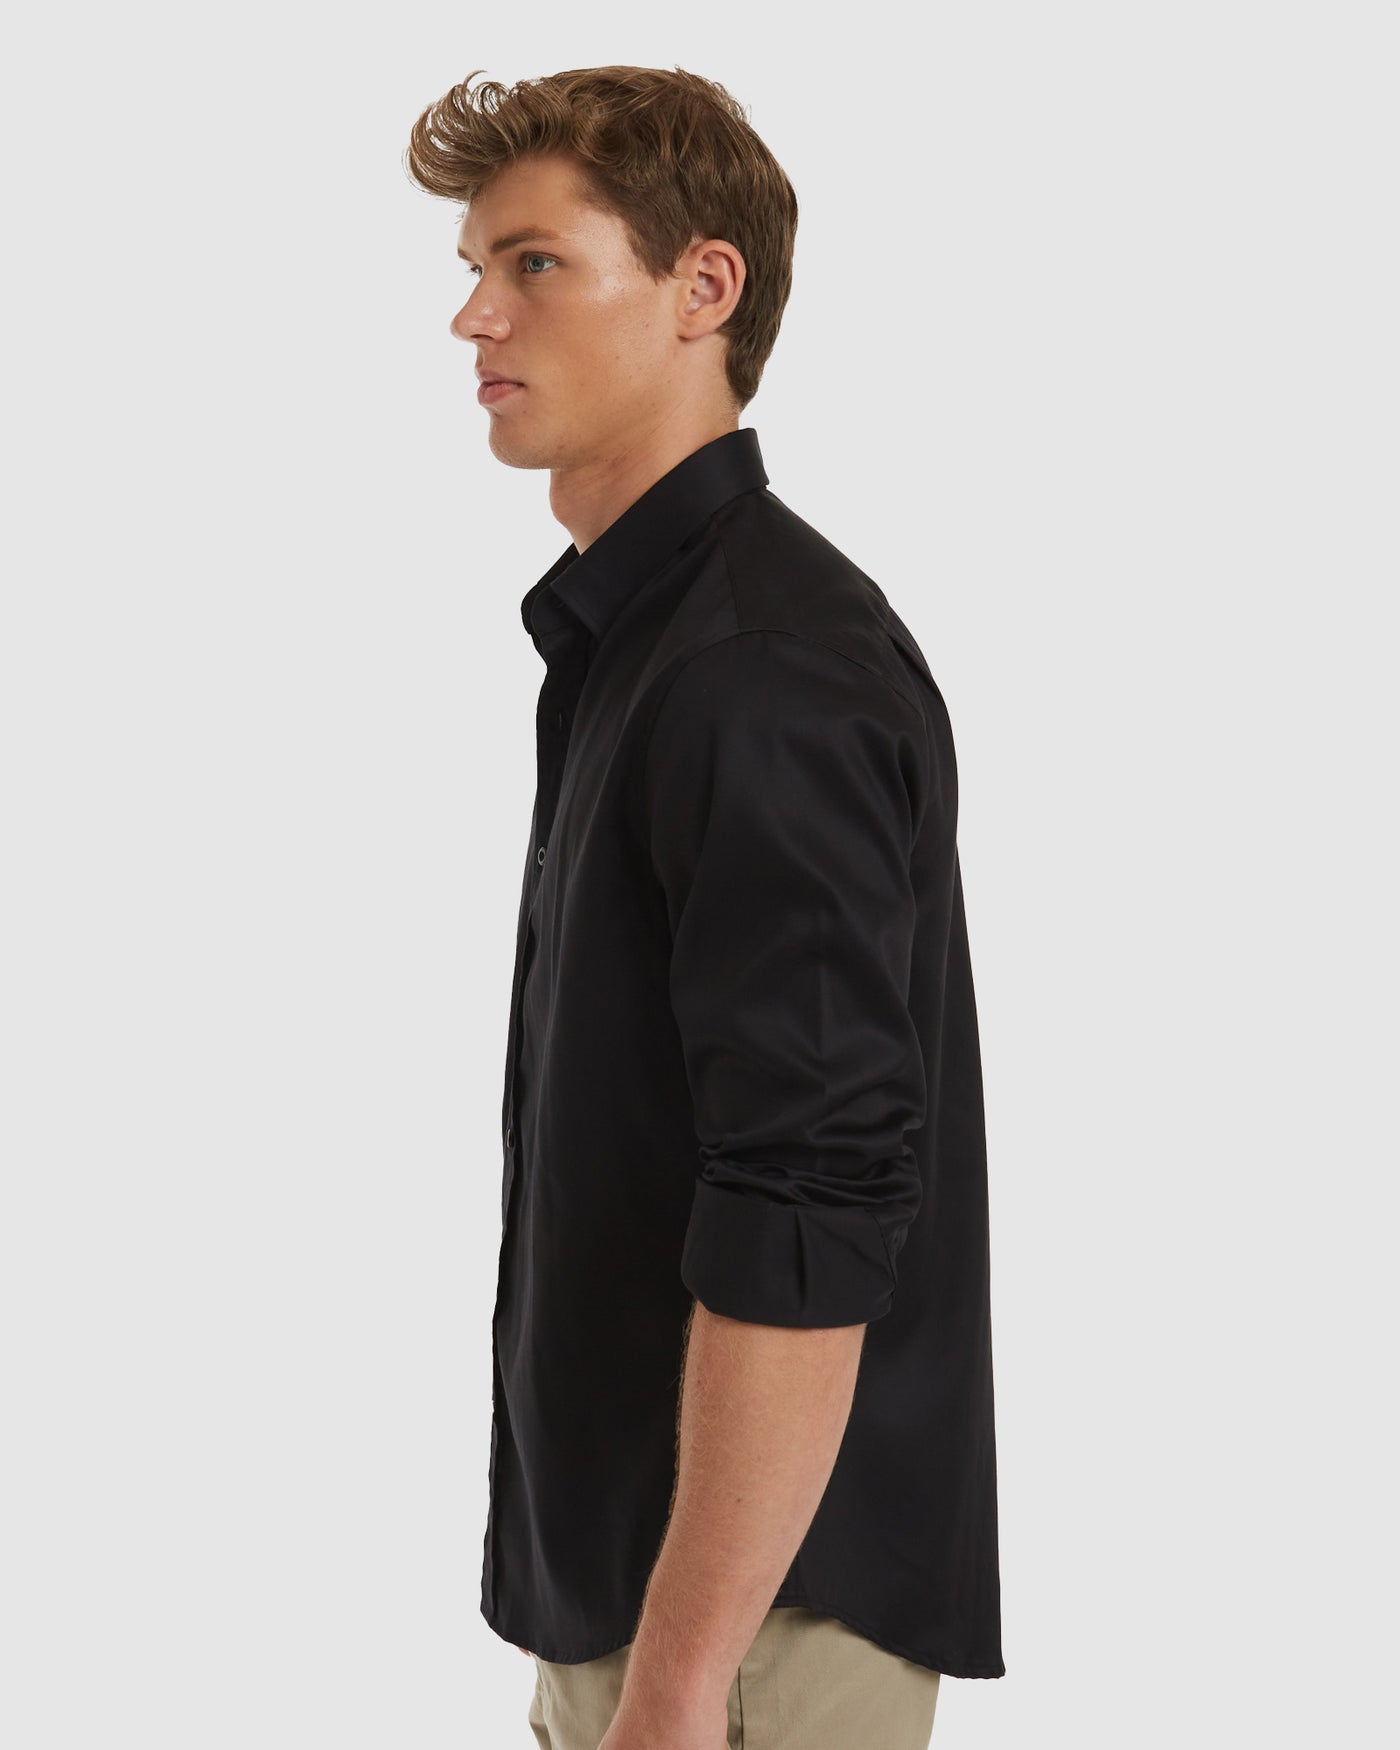 London Formal Black Shirt  - Non Iron Casual Fit